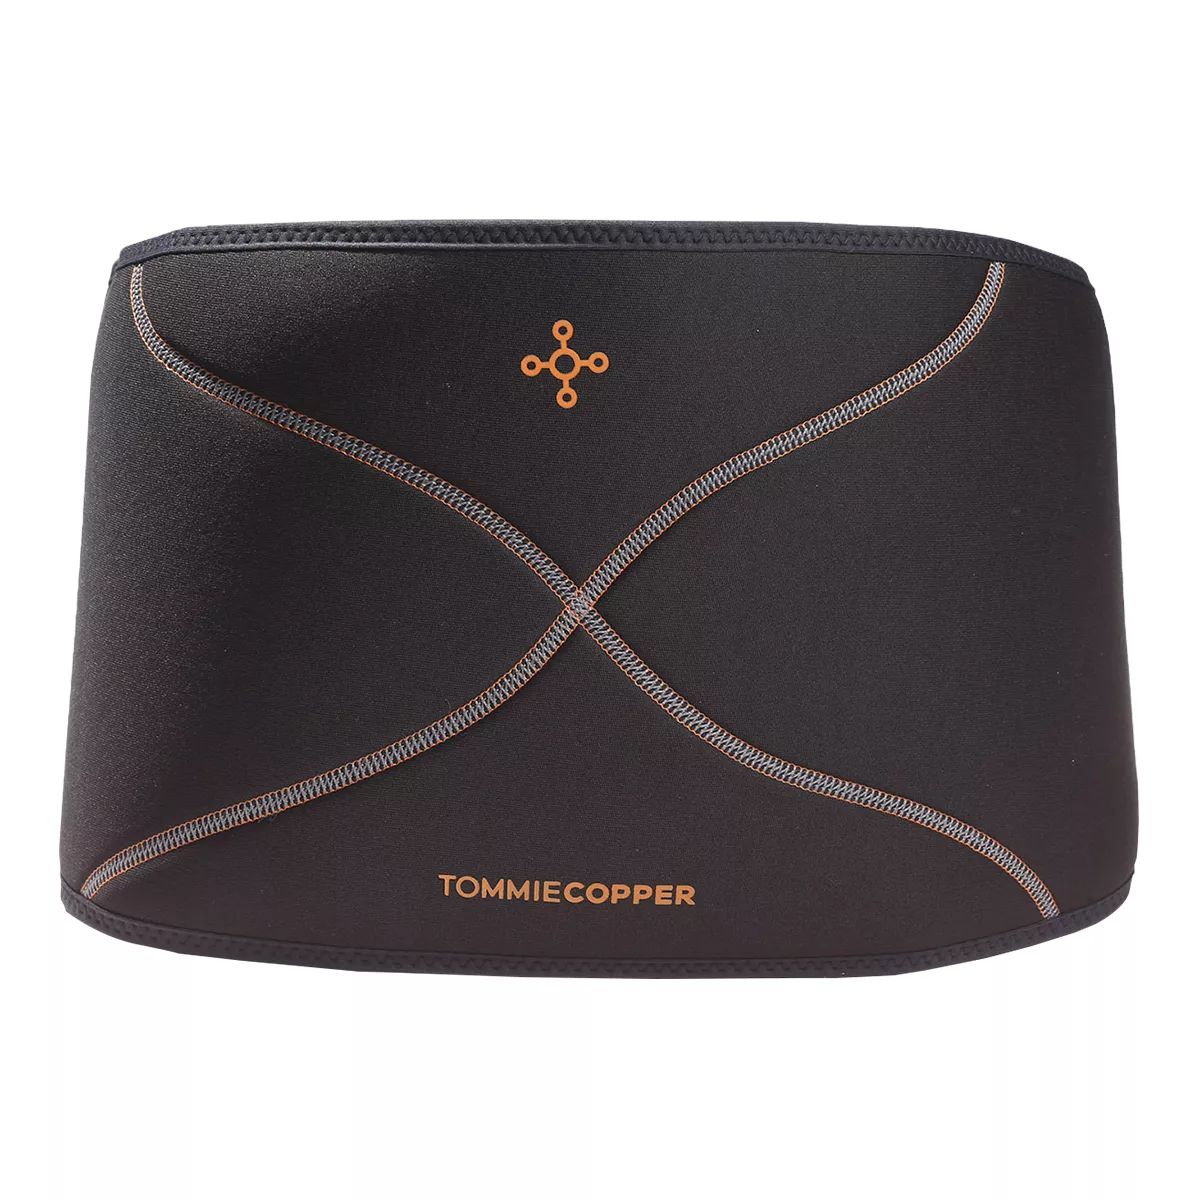 https://media-www.atmosphere.ca/product/div-01-hardgoods/dpt-44-wellness/sdpt-14-recovery/333020894/tommie-copper-comfort-back-br-s--5a537edf-3ed3-472d-9c37-c4f324718b19-jpgrendition.jpg